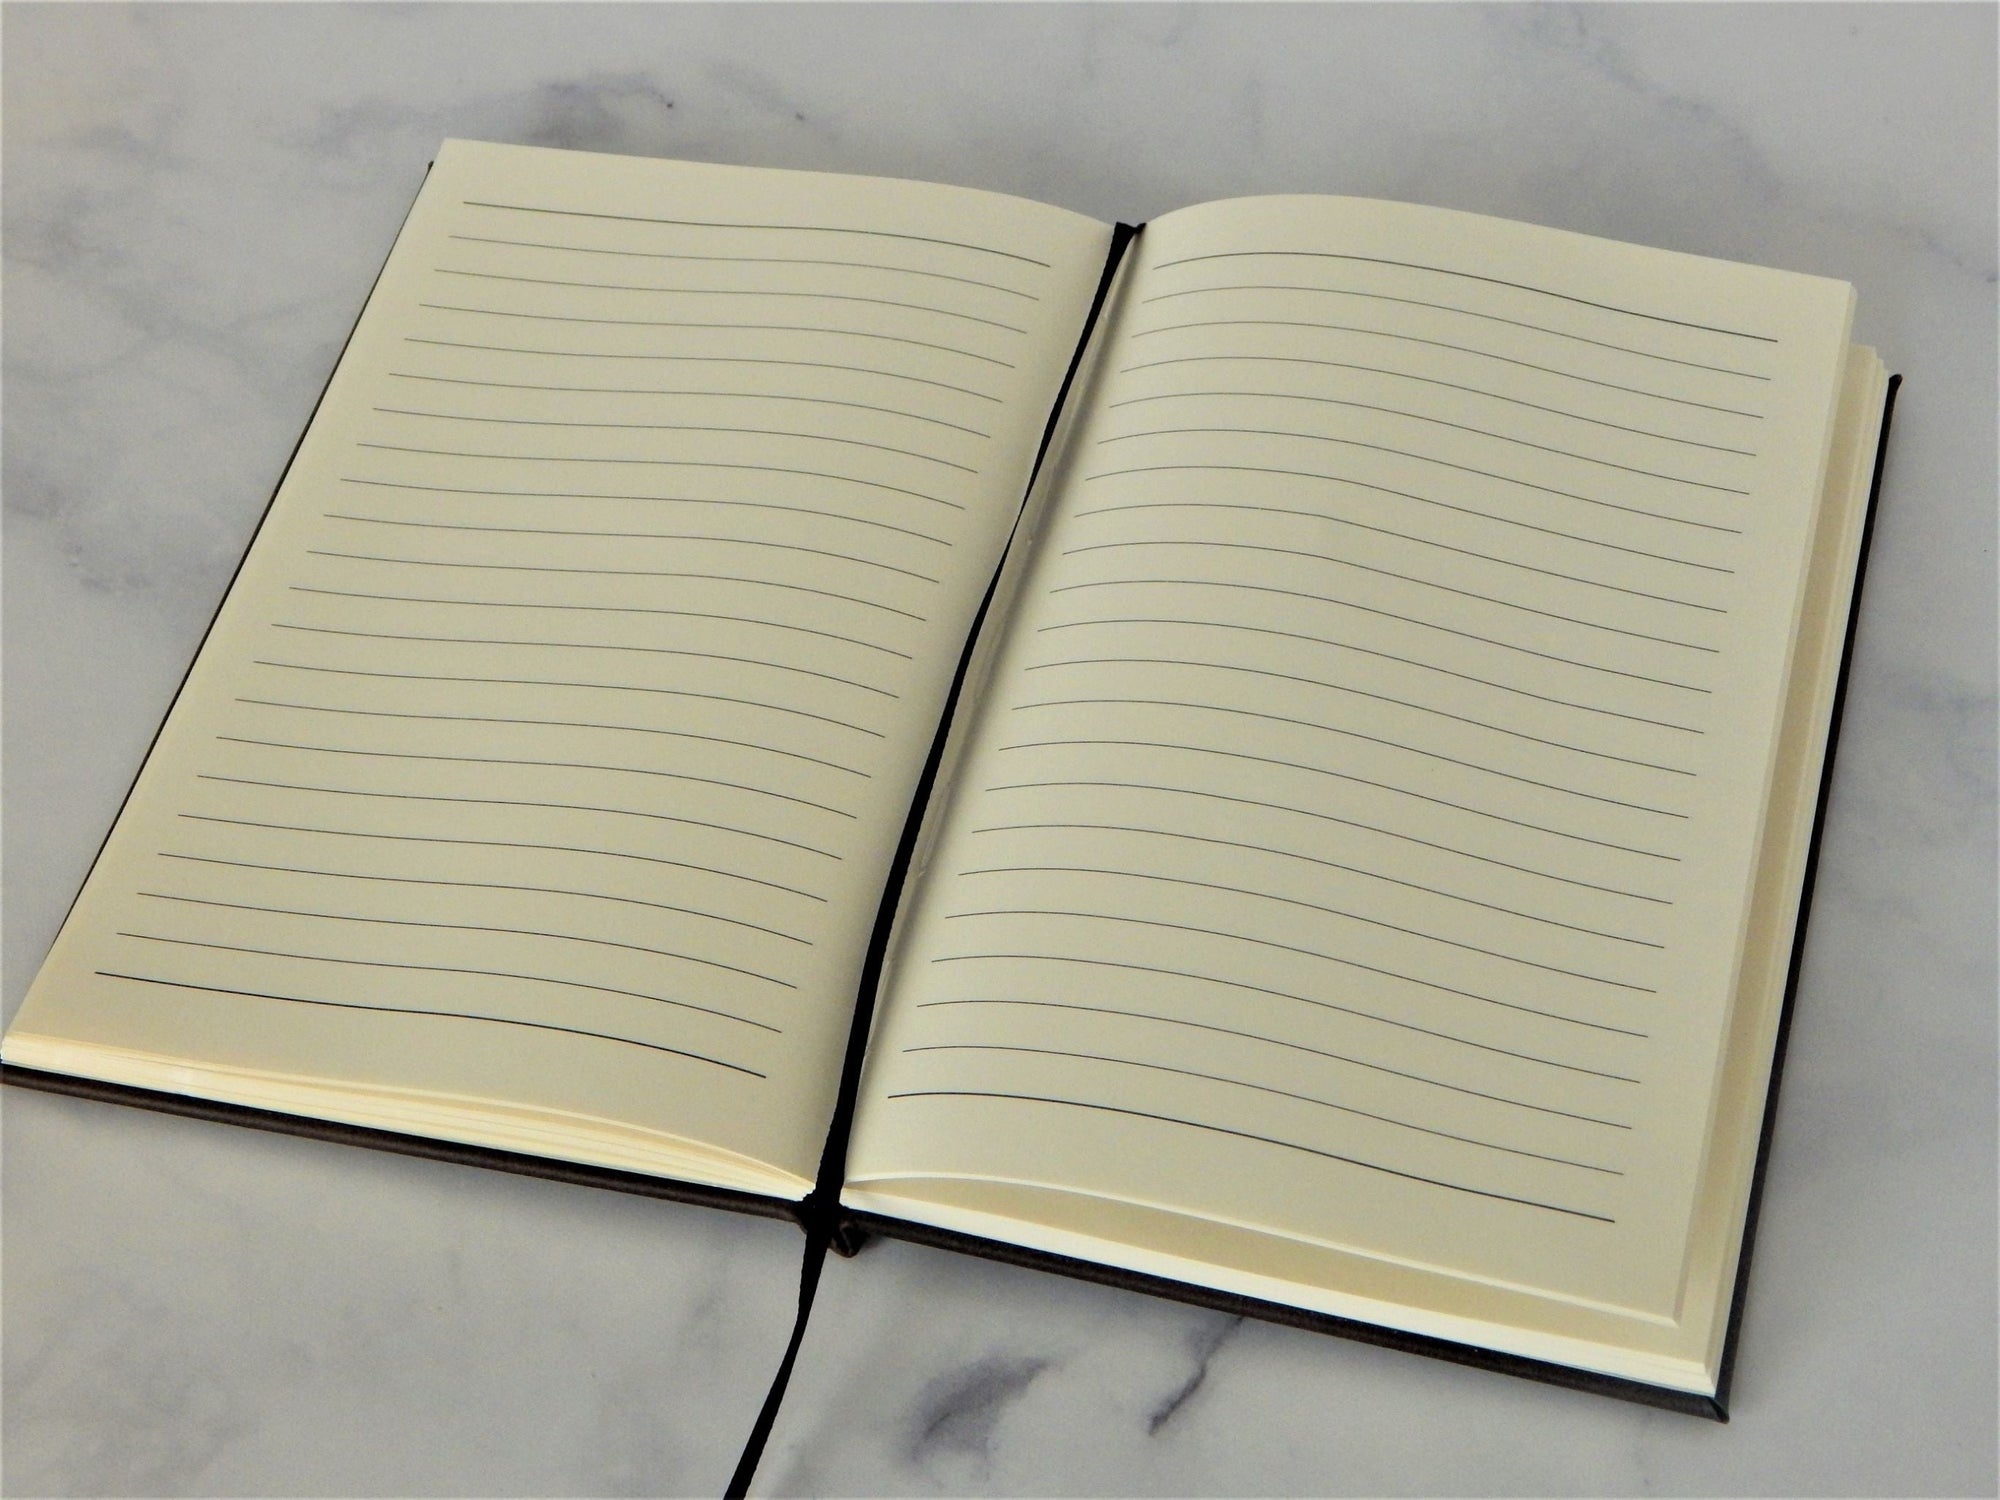 Bulk Custom Journals | Leather Notebook with Logo | Corporate Journal Notebooks